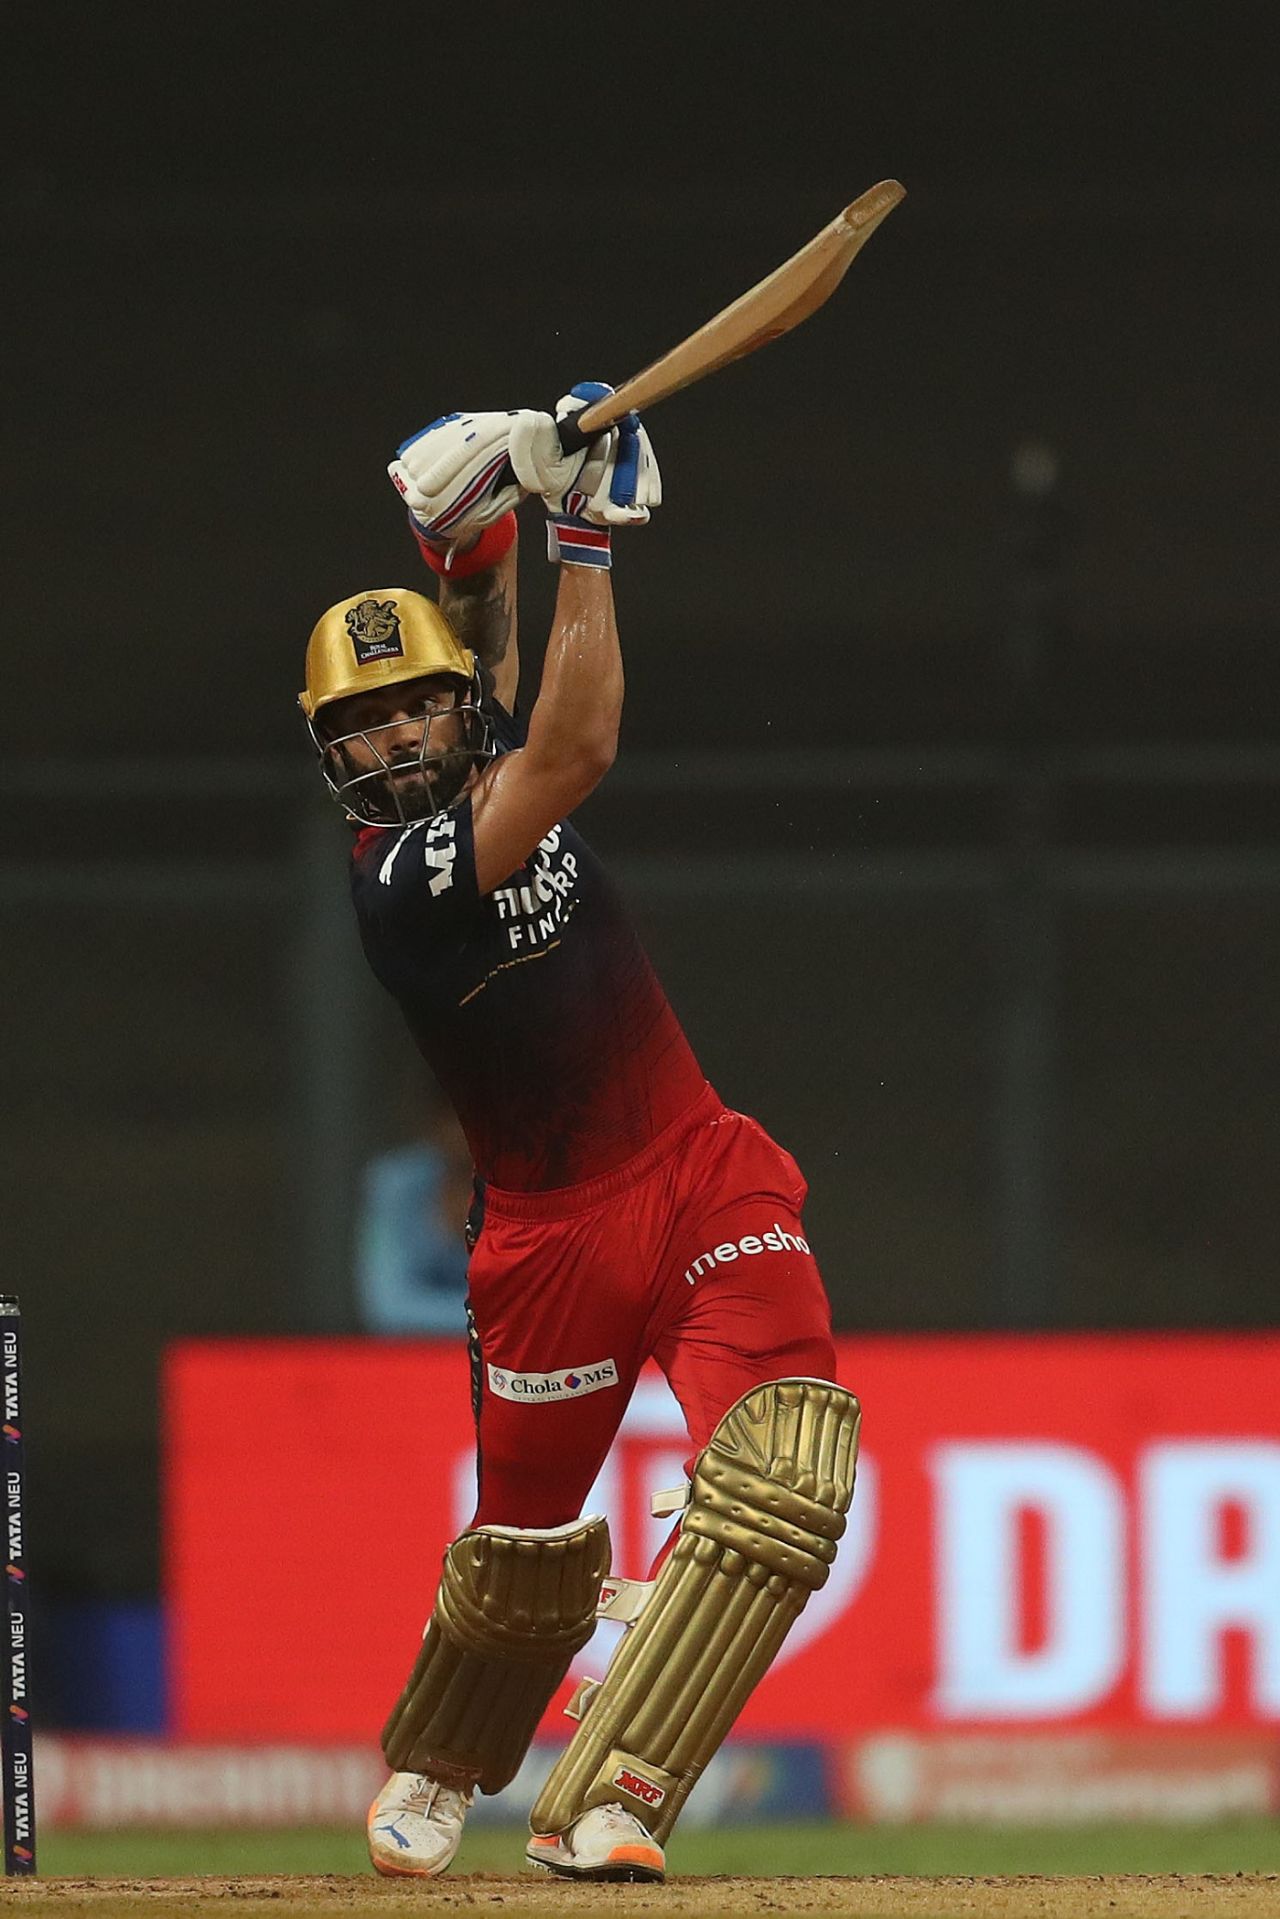 Aided by a couple of streaky fours, Virat Kohli got off the blocks quickly, Royal Challengers Bangalore vs Gujarat Titans, IPL 2022, Wankhede Stadium, Mumbai, May 19, 2022